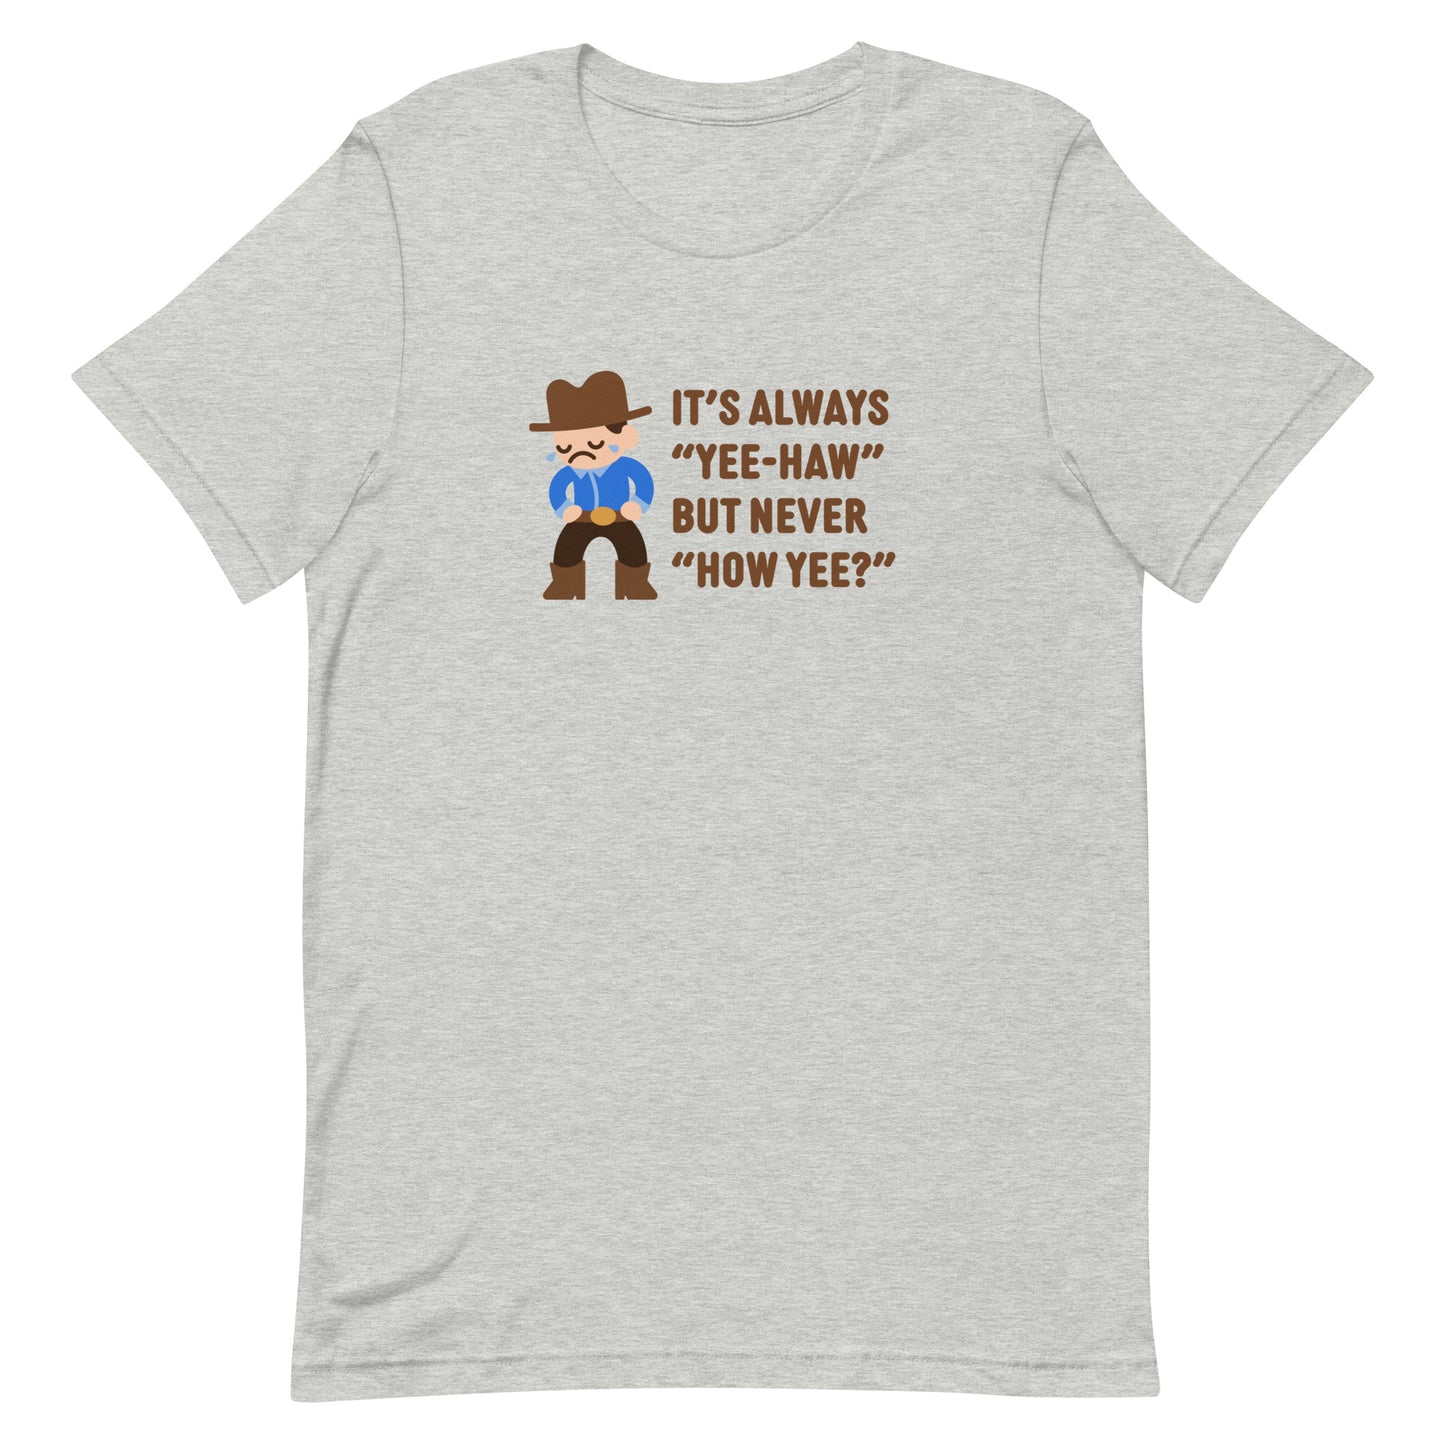 A grey crewneck t-shirt featuring an illustration of a crying cowboy wearing a blue shirt. Text alongside the cowboy reads "It's always "yee-haw" but never "How yee?""